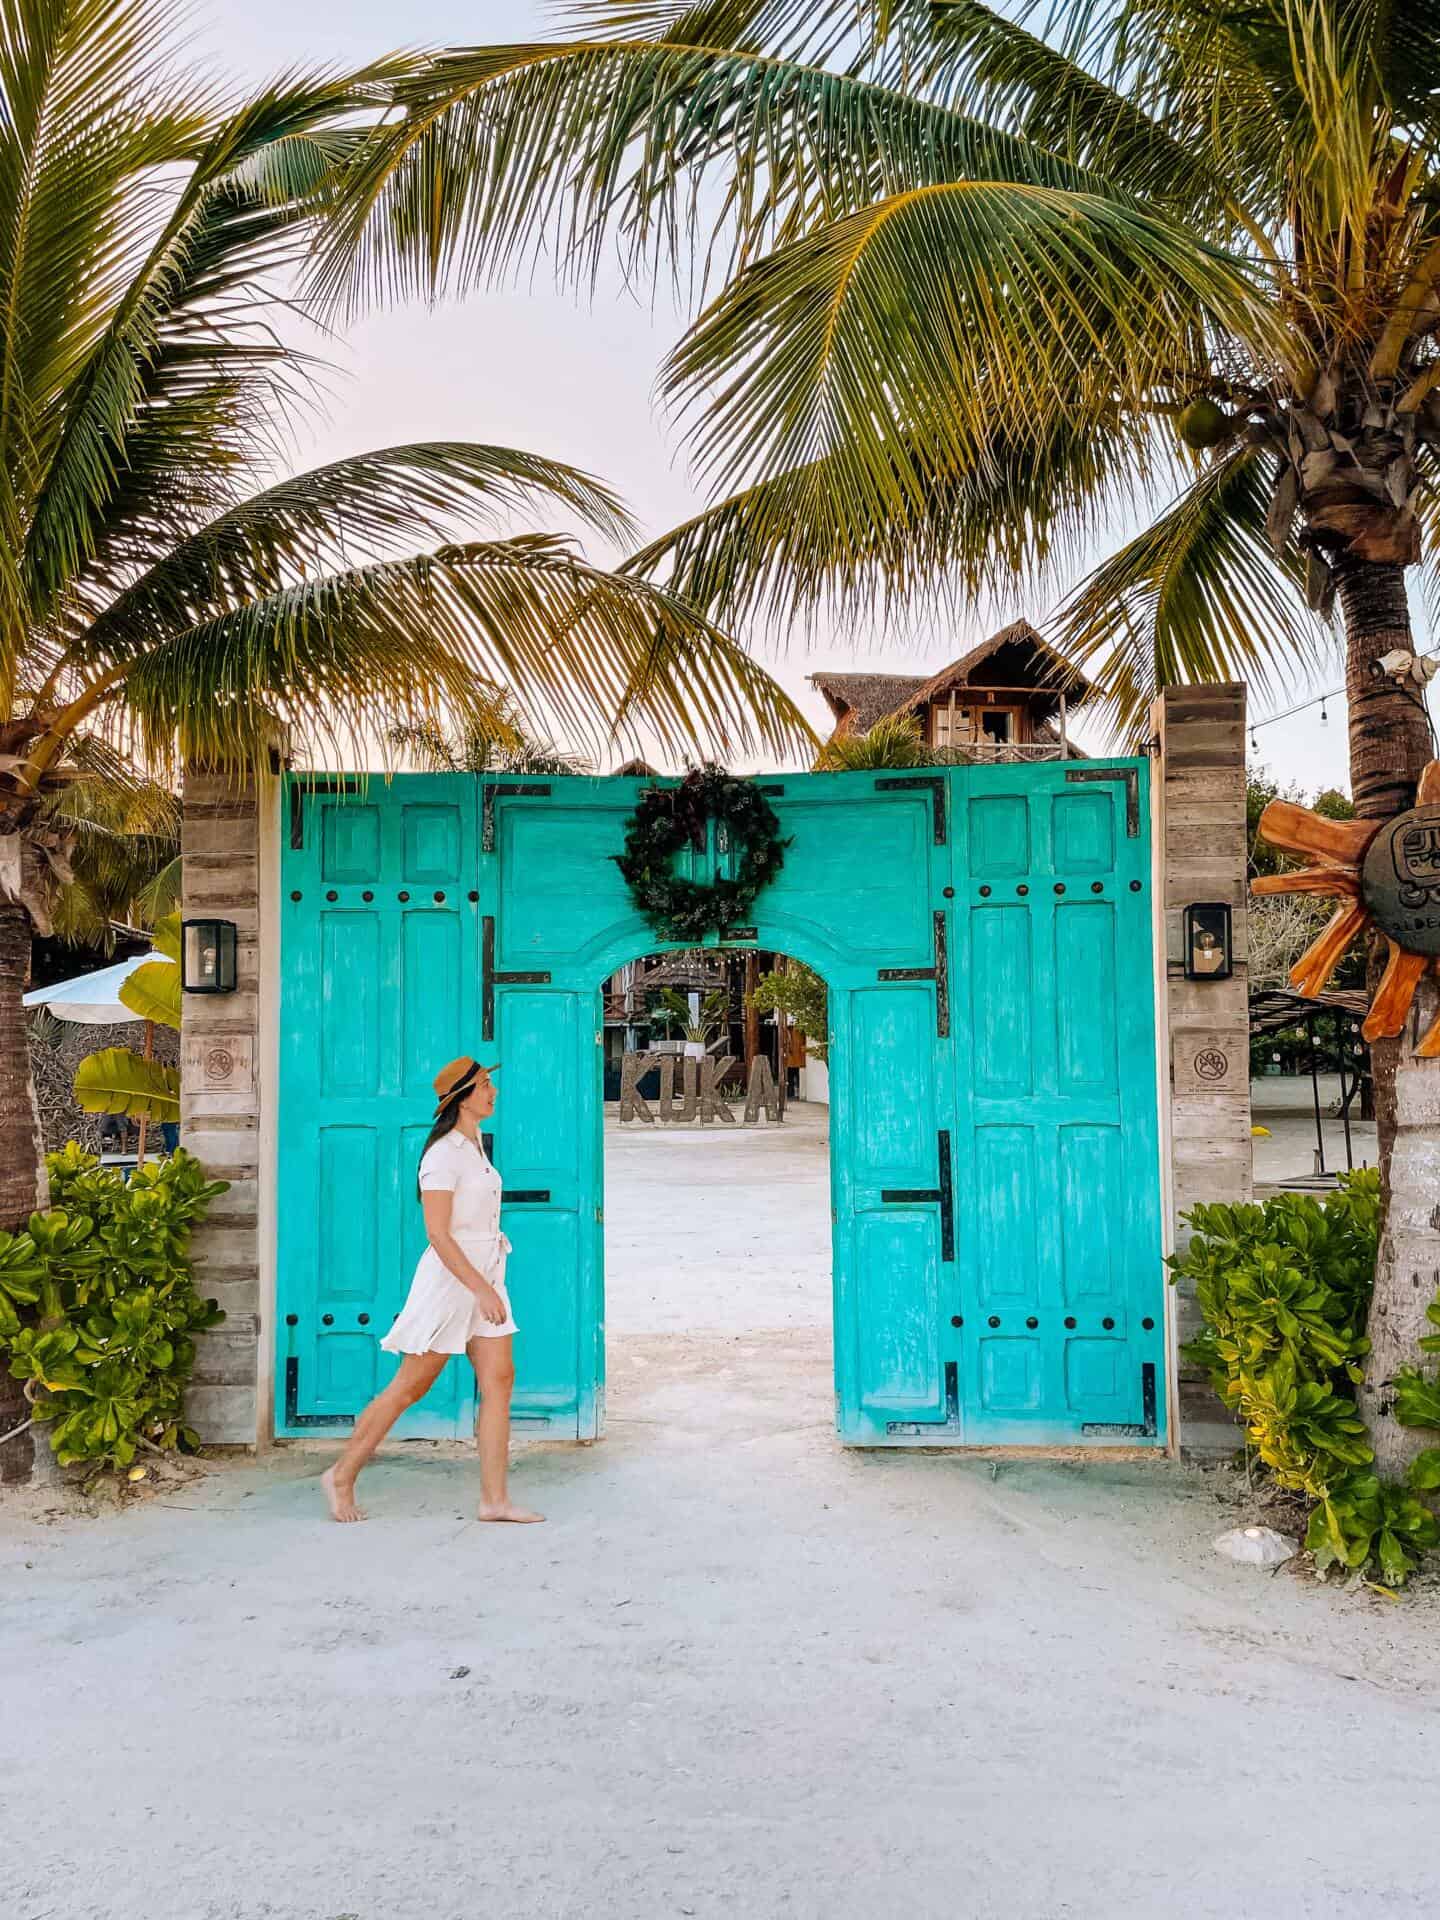 Best Instagram spots of the most beautiful places in Holbox island in Mexico